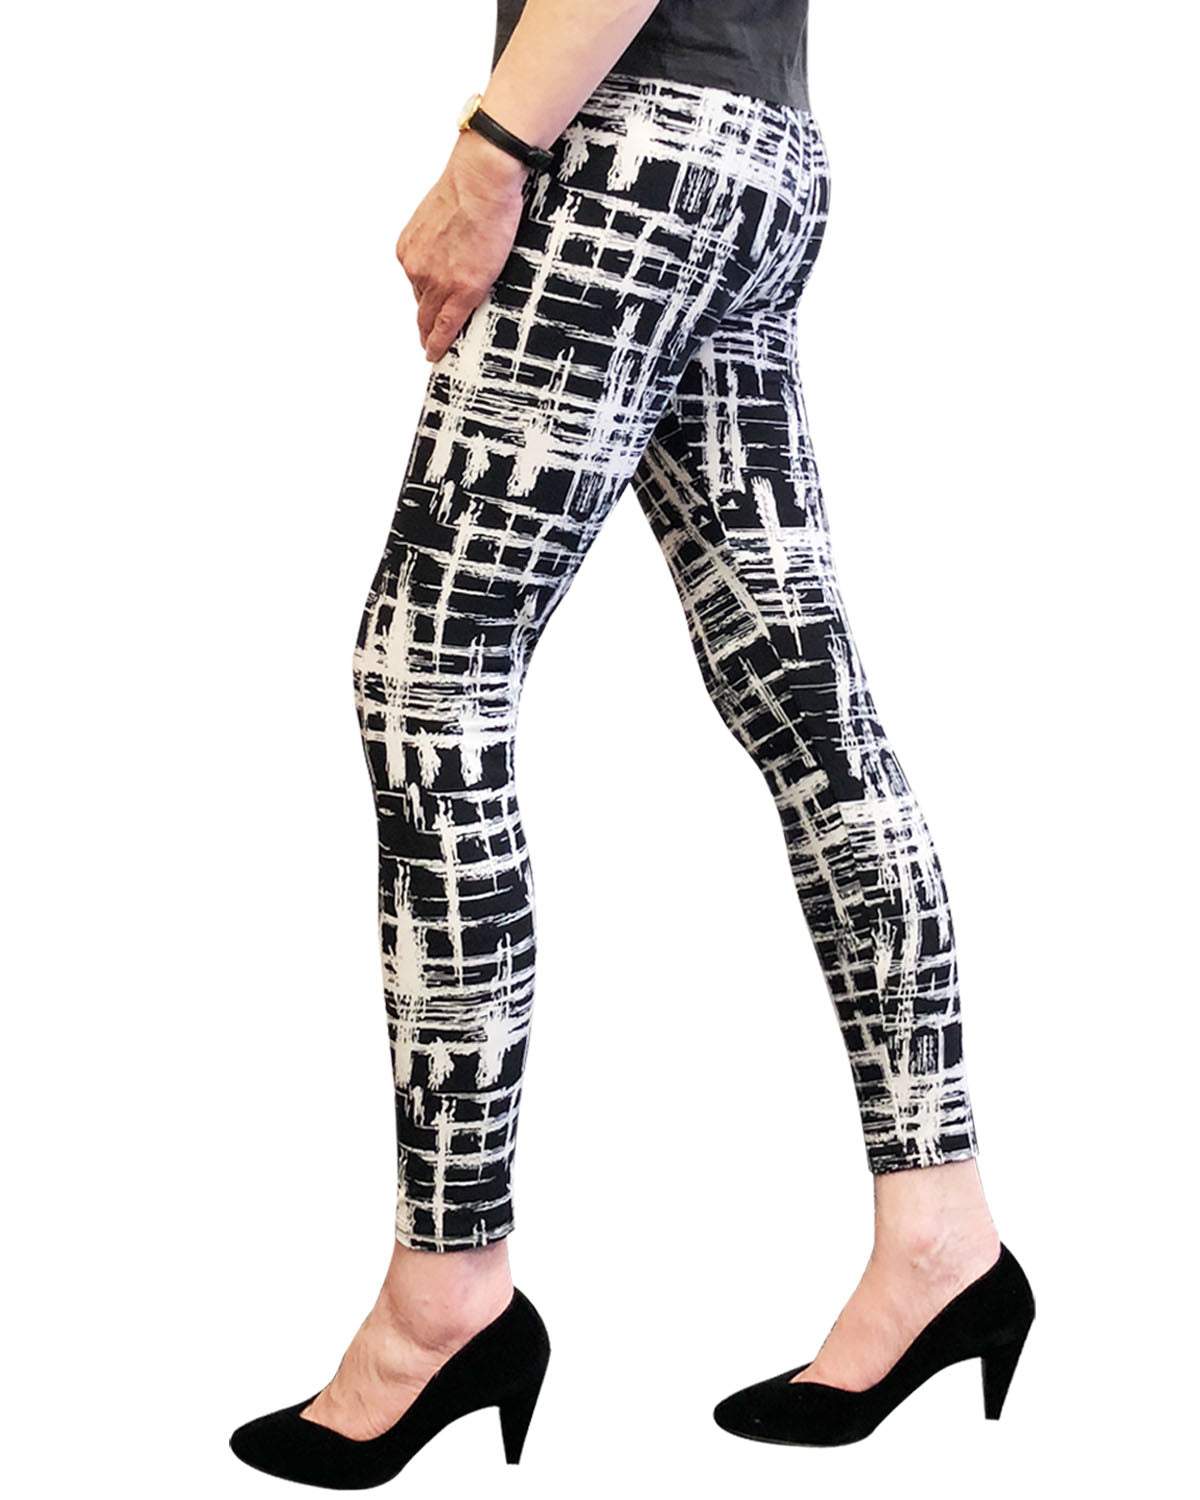 Wrapables Women's Ultra-Soft and Stretchy Printed Leggings for Activewear and Workout